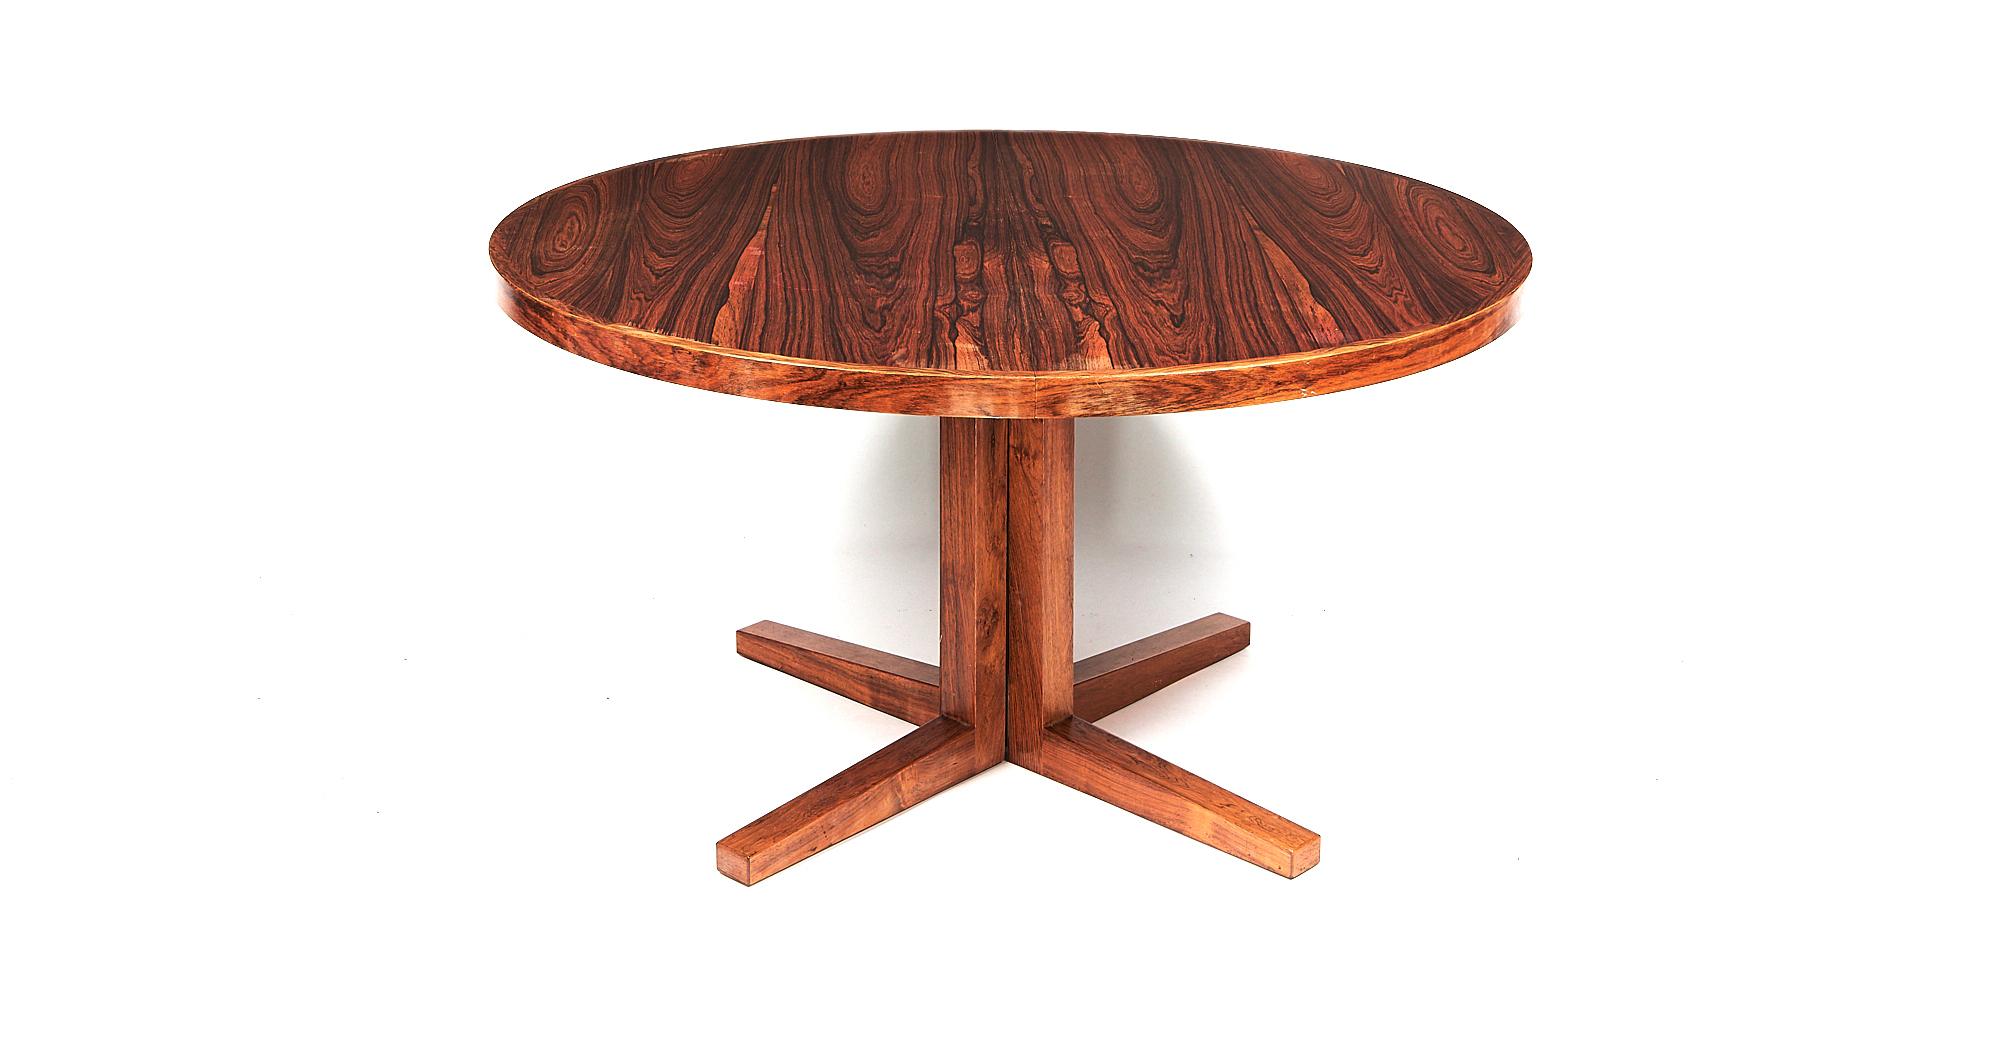 A 1960s rosewood extending dining table with two leaves by John Mortensen for Heltborg Møbler, Denmark
Without leaves the table is circular (diameter 130cm) but extends to 228cm long with the leaves added. The V shaped leg supports have been